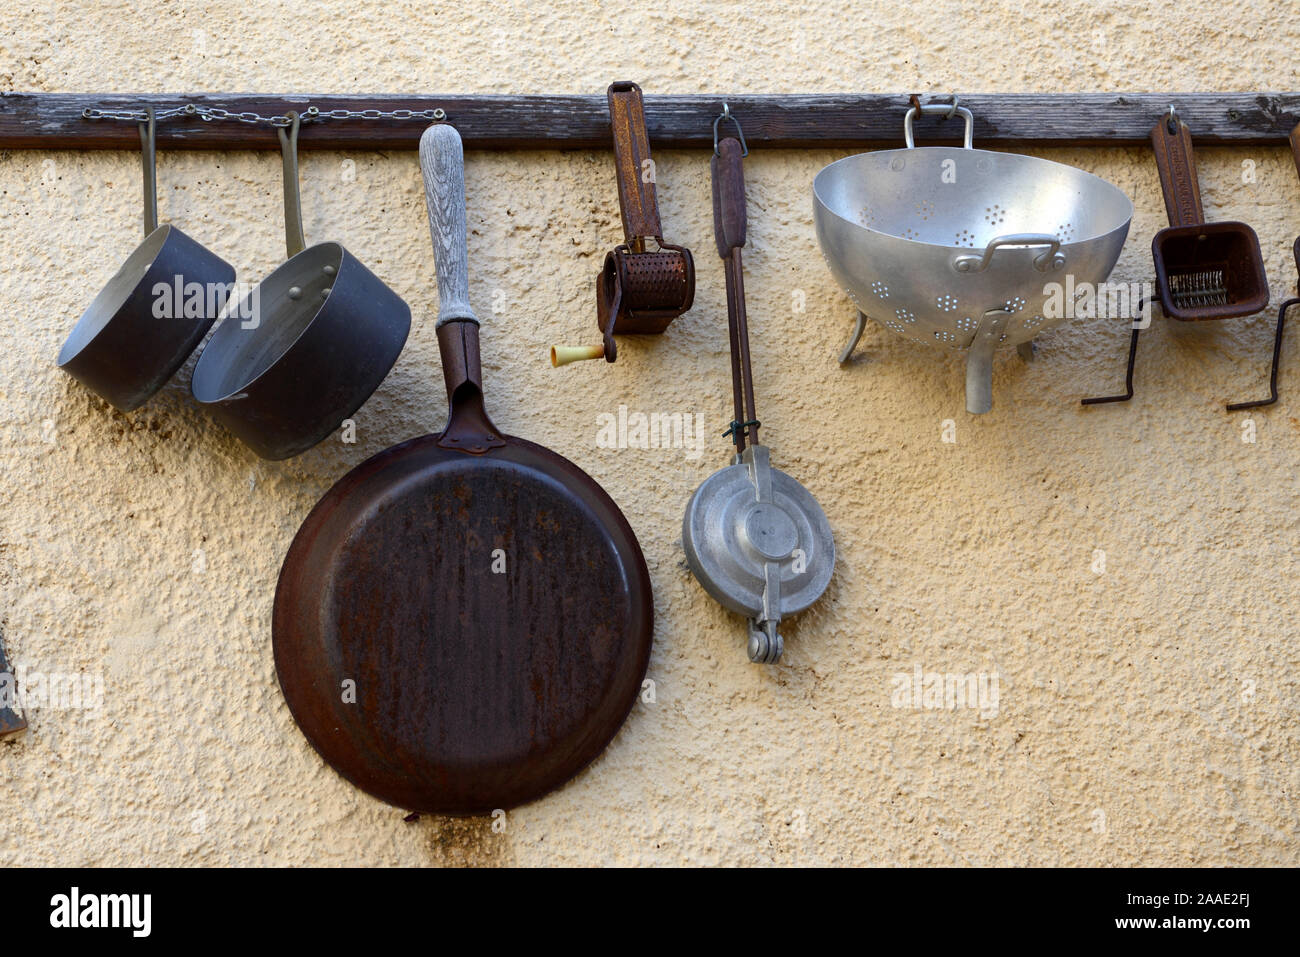 Vintage or Antique Collection of Old Kitchen Utensils Hanging on Wall Rack including Pans, Drainers & Spatulas Stock Photo